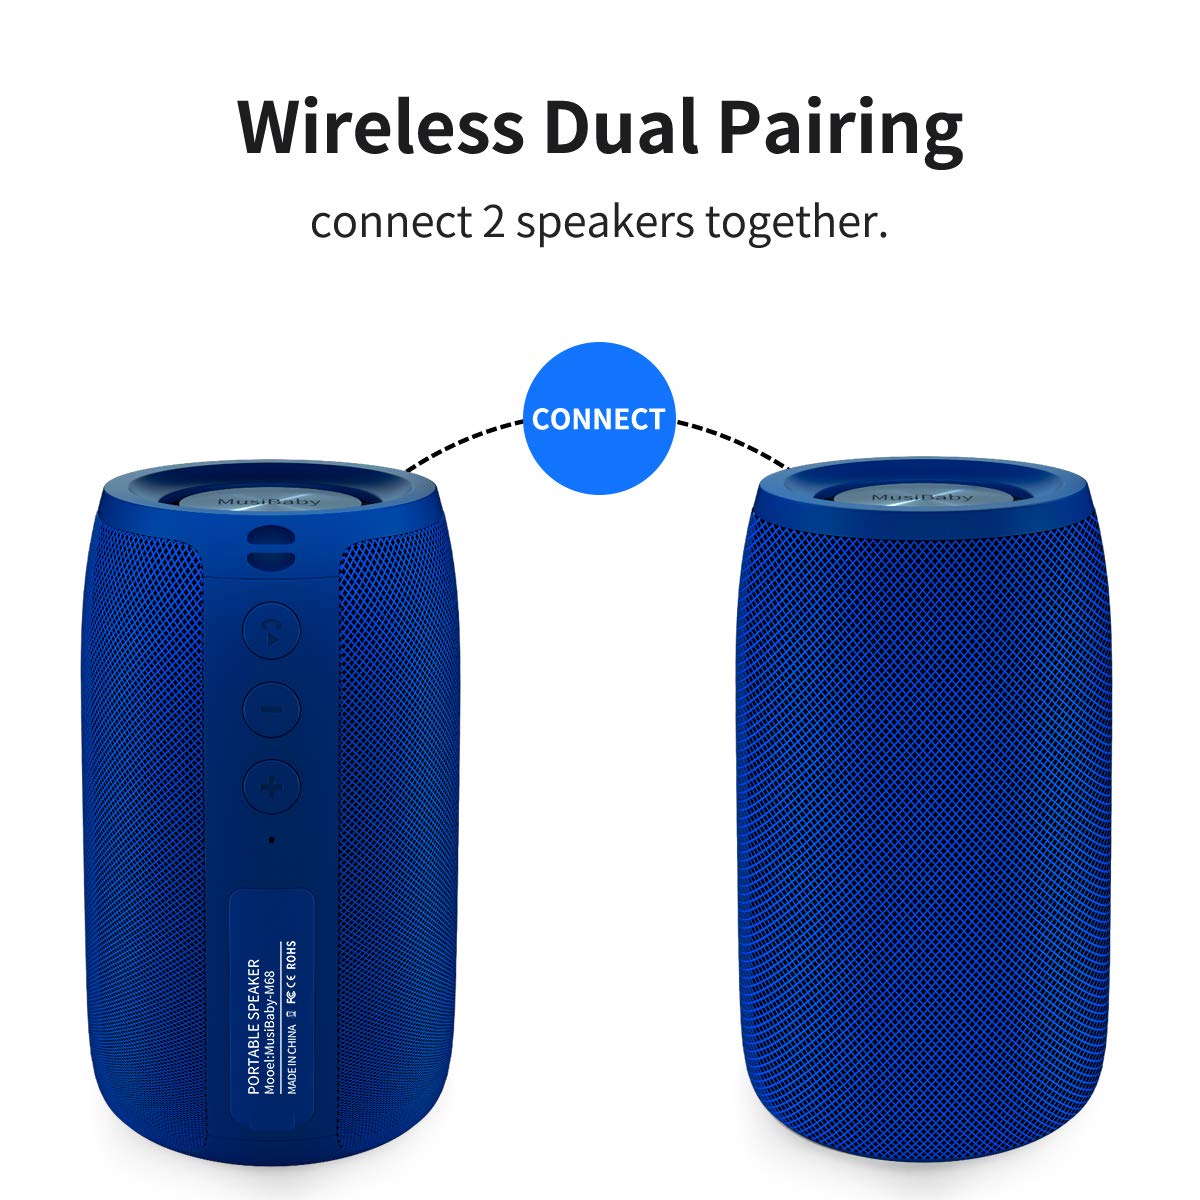 Bluetooth Speakers,MusiBaby Speaker,Outdoor,Wireless,Waterproof, Portable Speaker,Dual Pairing, Bluetooth 5.0,Loud Stereo,Booming Bass,1500 Mins Playtime for Home,Party,Gifts(Blue)